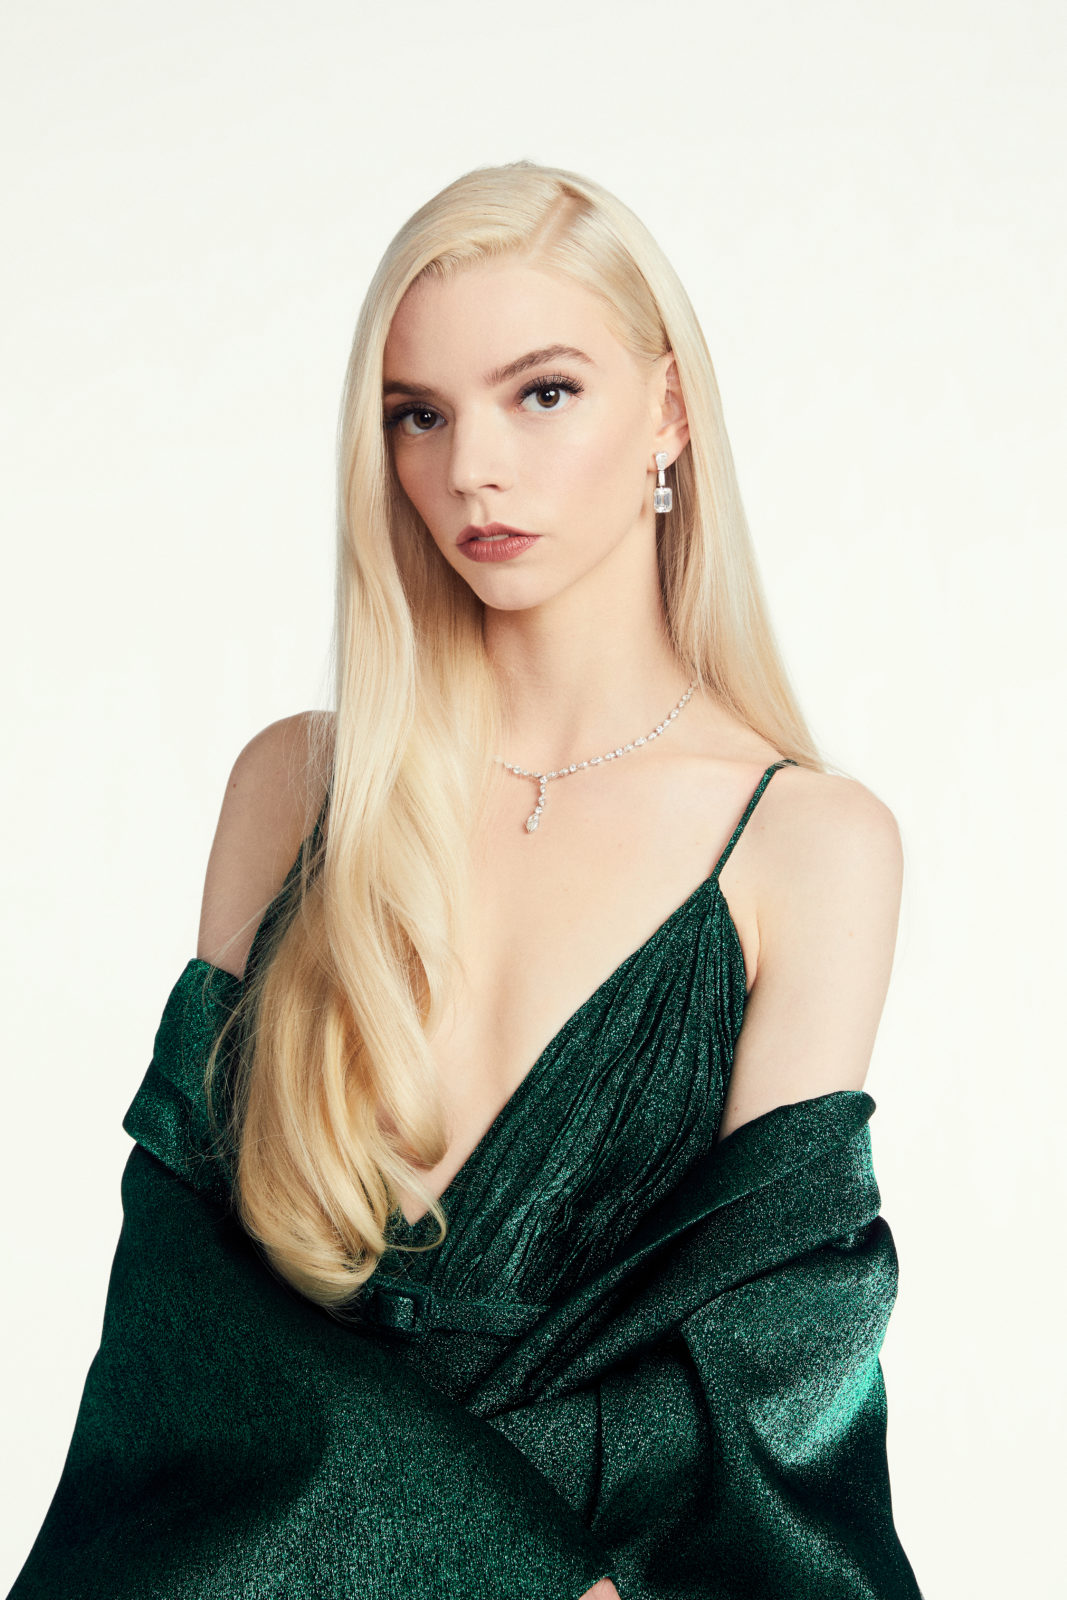 Emmy Nominee Anya Taylor-Joy Once Revealed That She Doesn't